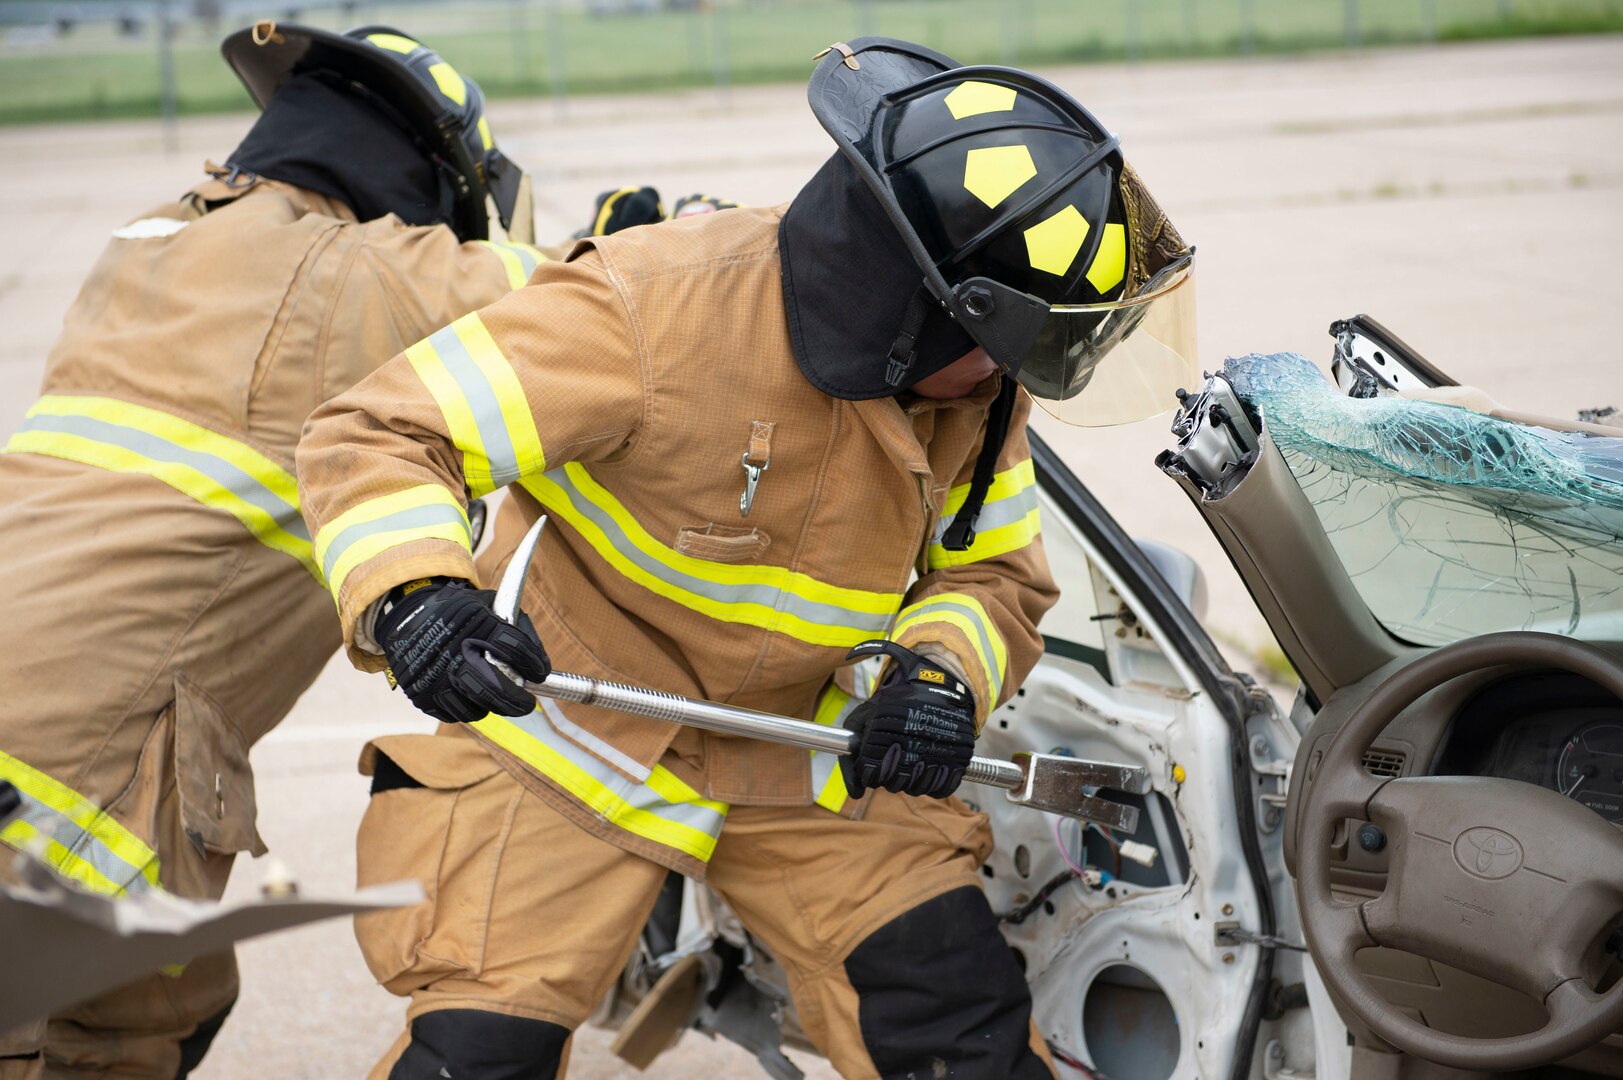 Firefighters from the Army of the Czech Republic air forces remove a door from a vehicle during training with the 155th Air Refueling Wing fire department June 6, 2019, at the Nebraska National Guard air base in Lincoln, Nebraska. This Nebraska National Guard and Czech Republic armed forces training exchange is one of many facilitated by the National Guard’s State Partnership Program.